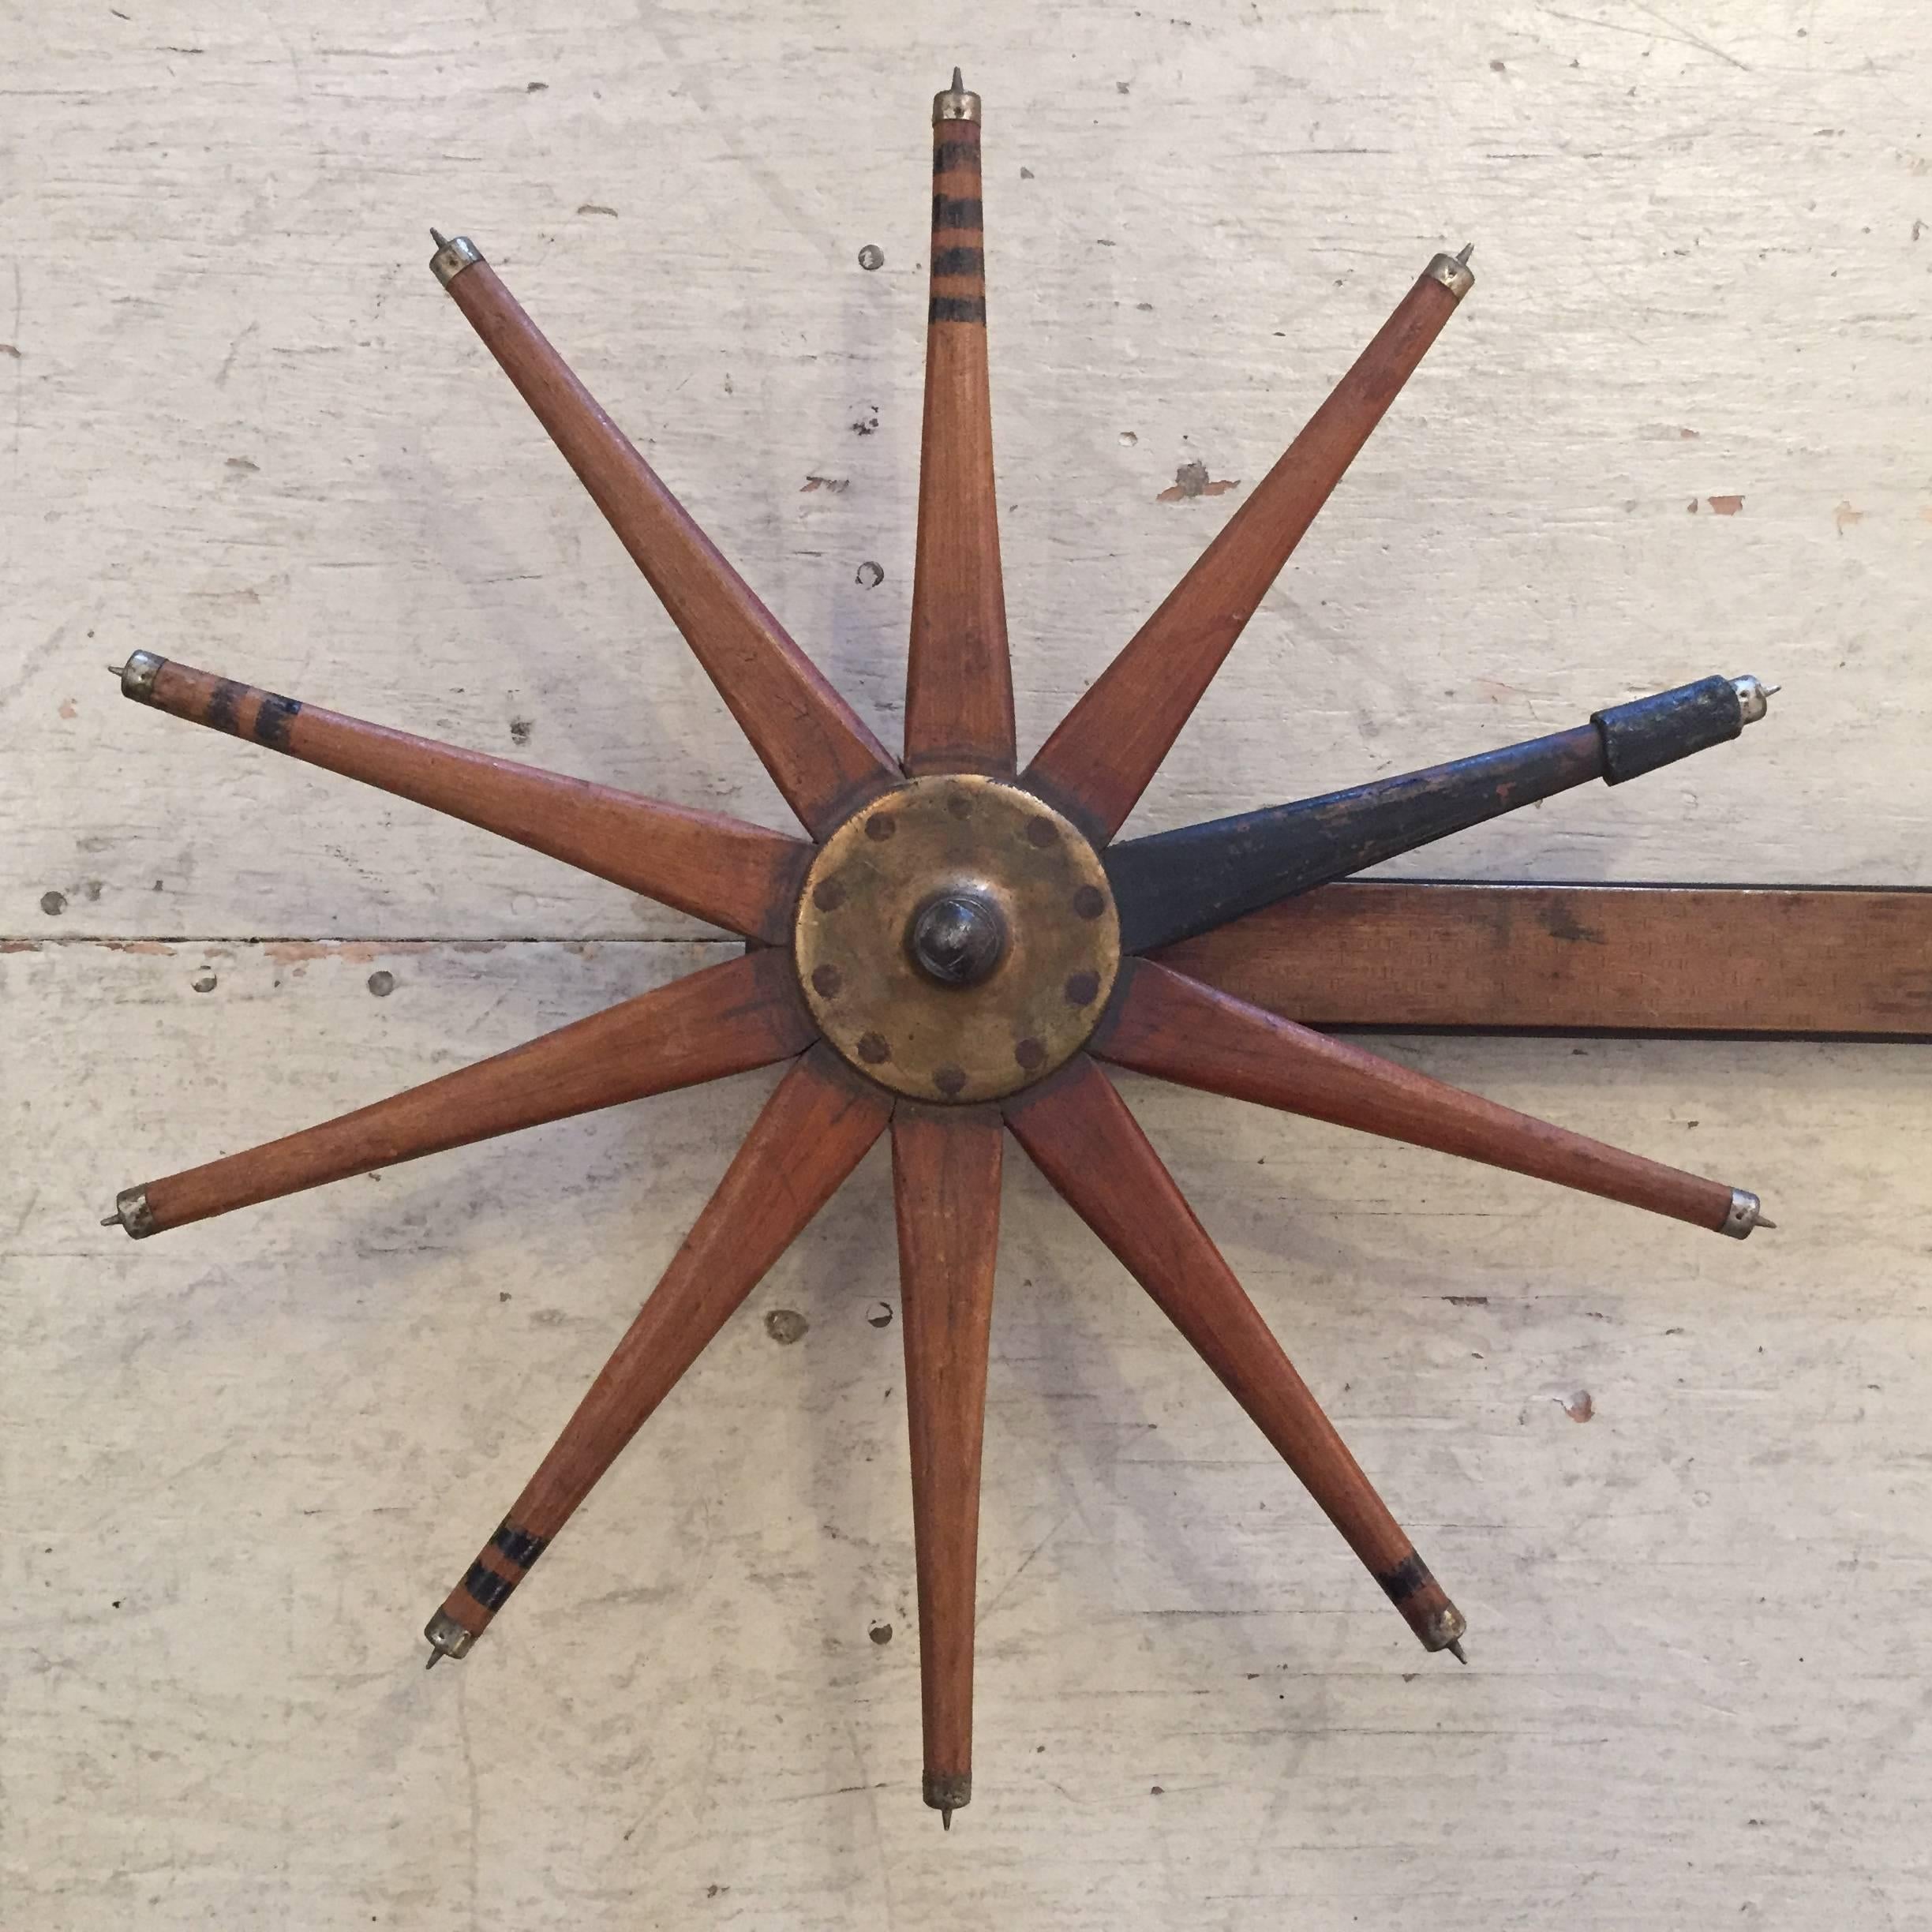 A rich in character 19th century measuring instrument used on trees, wonderful as a wall-mounted sculpture for it's rustic yet beautiful combination of wooden shapes including a wheel reminiscent of a carnival toy and a caliper with original